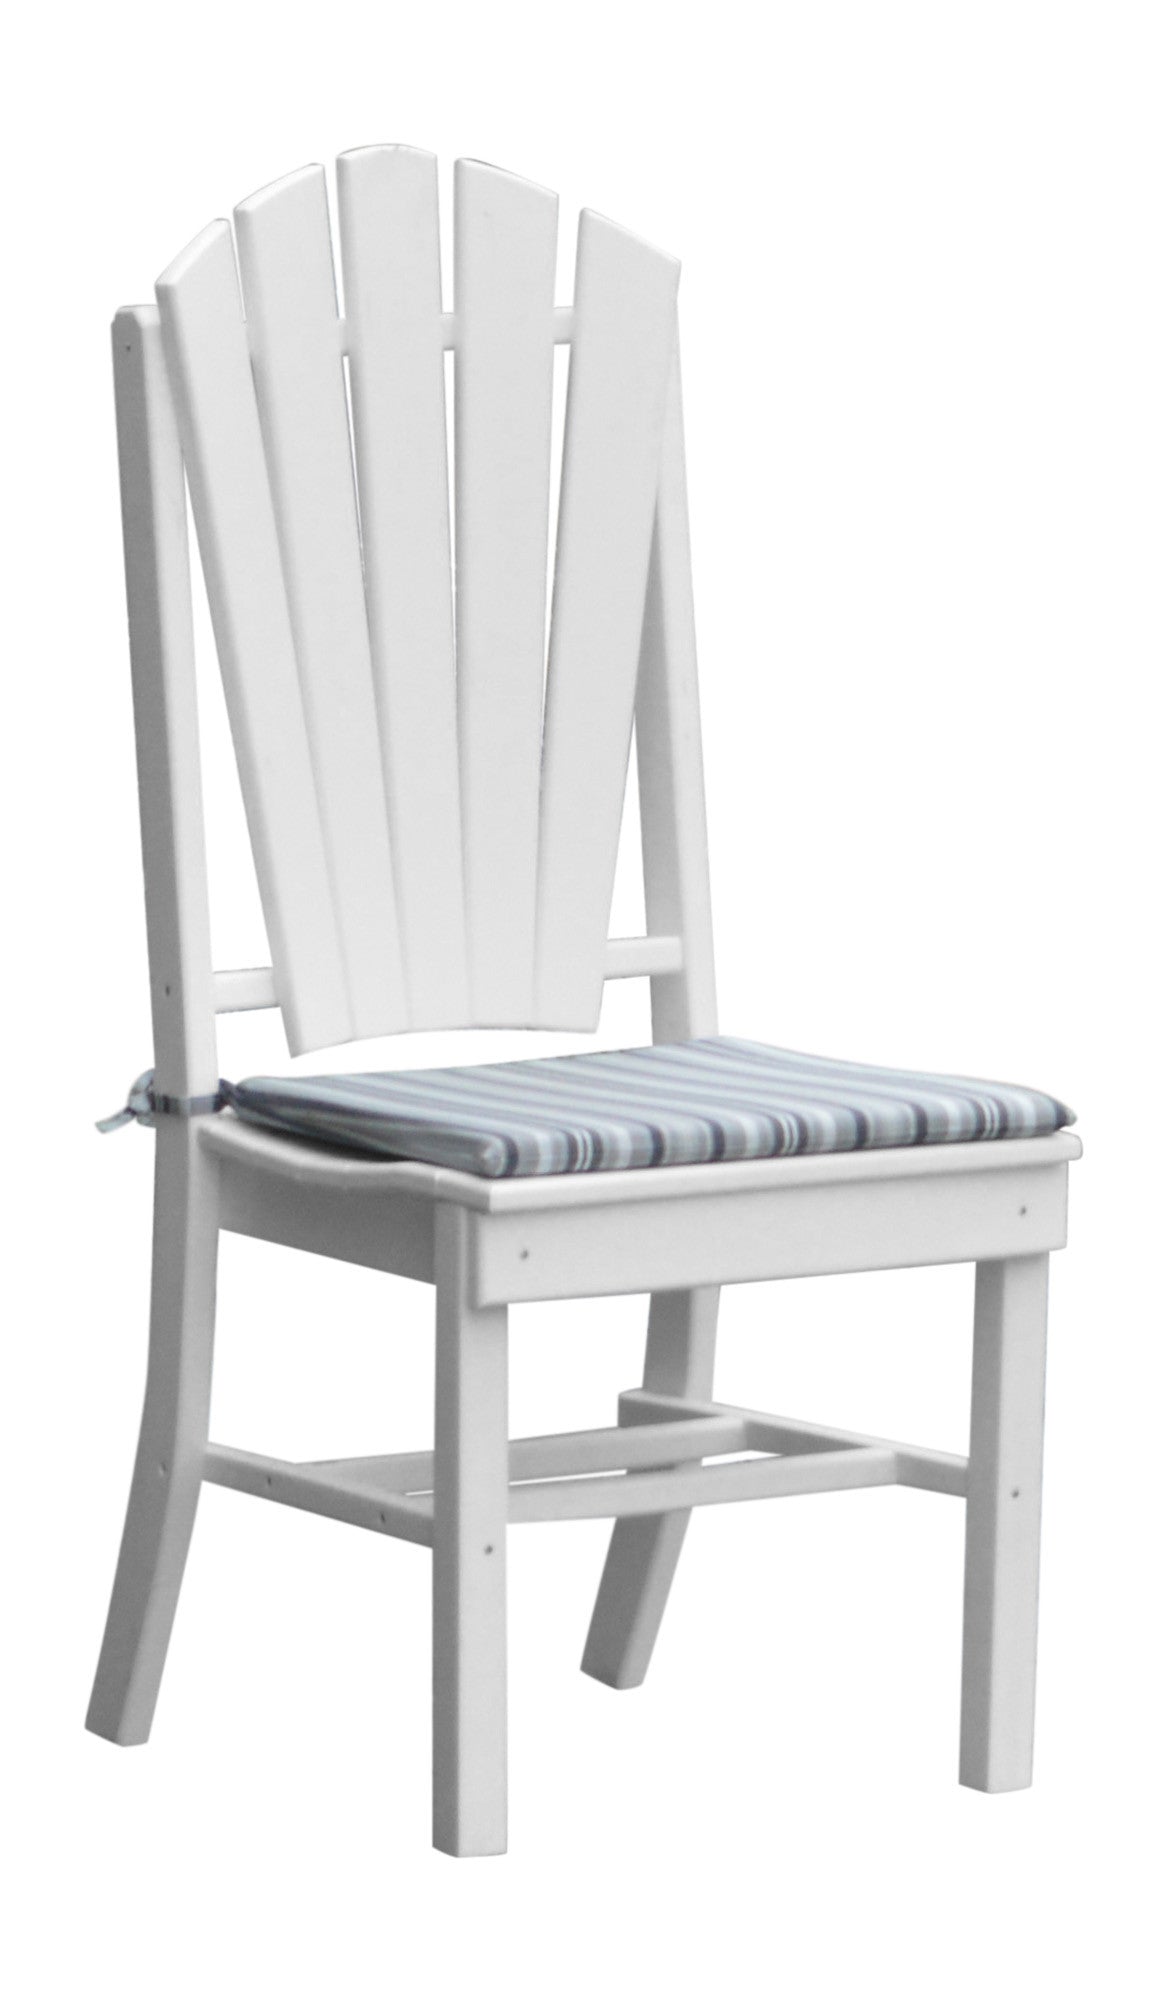 A&L Furniture Company Recycled Plastic Adirondack Dining Chair - White